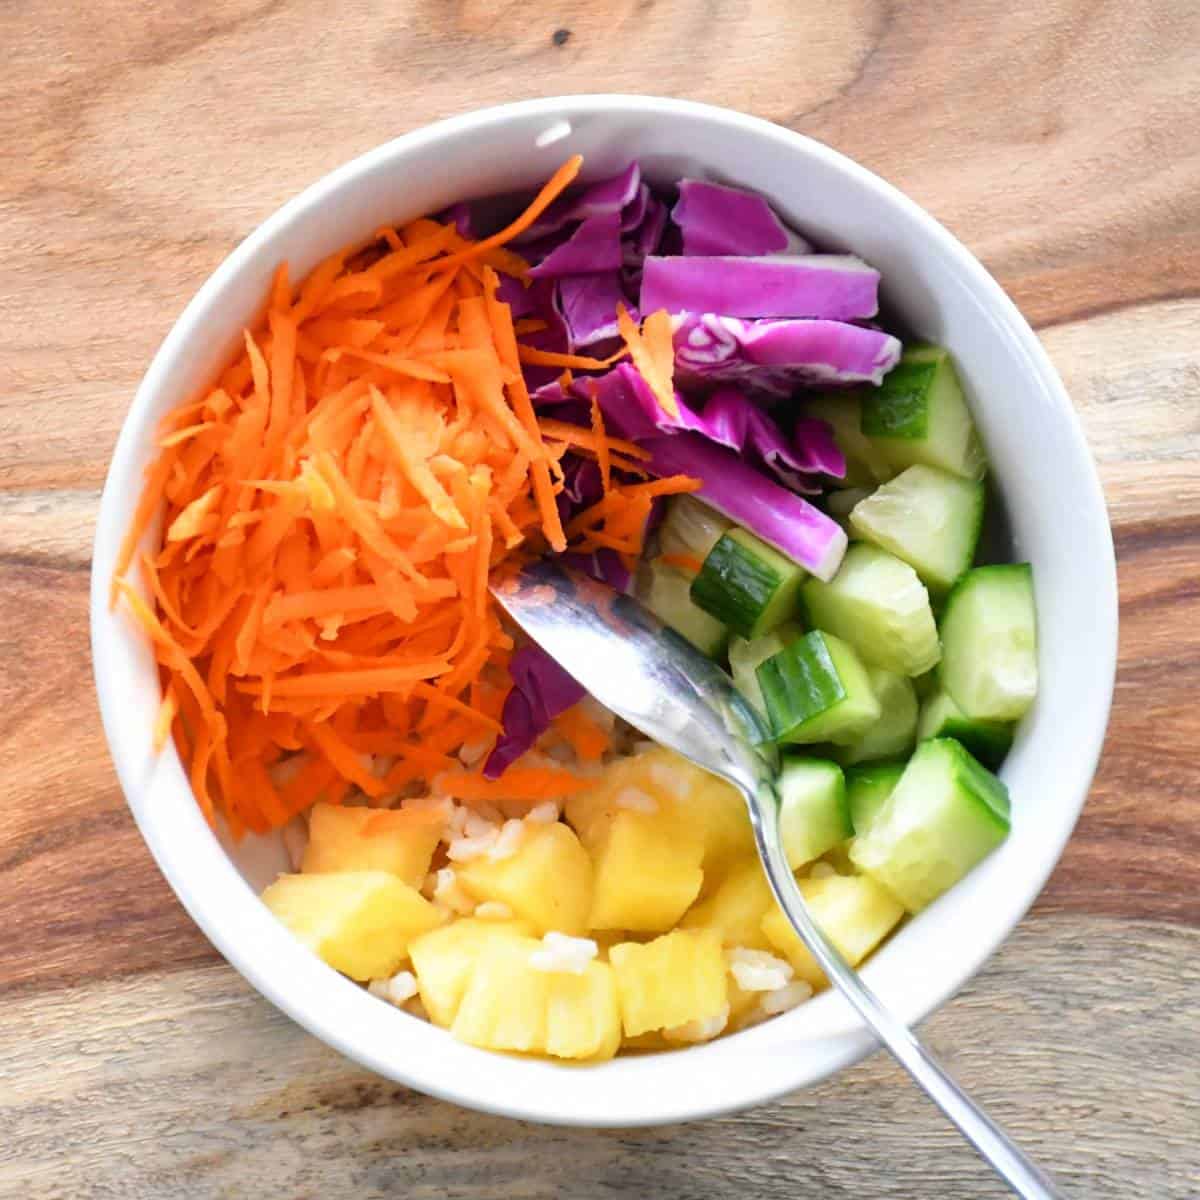 Assembling a colorful vegetarian poke bowl made of brown rice, cucumbers, pineapple, carrots and red cabbage.